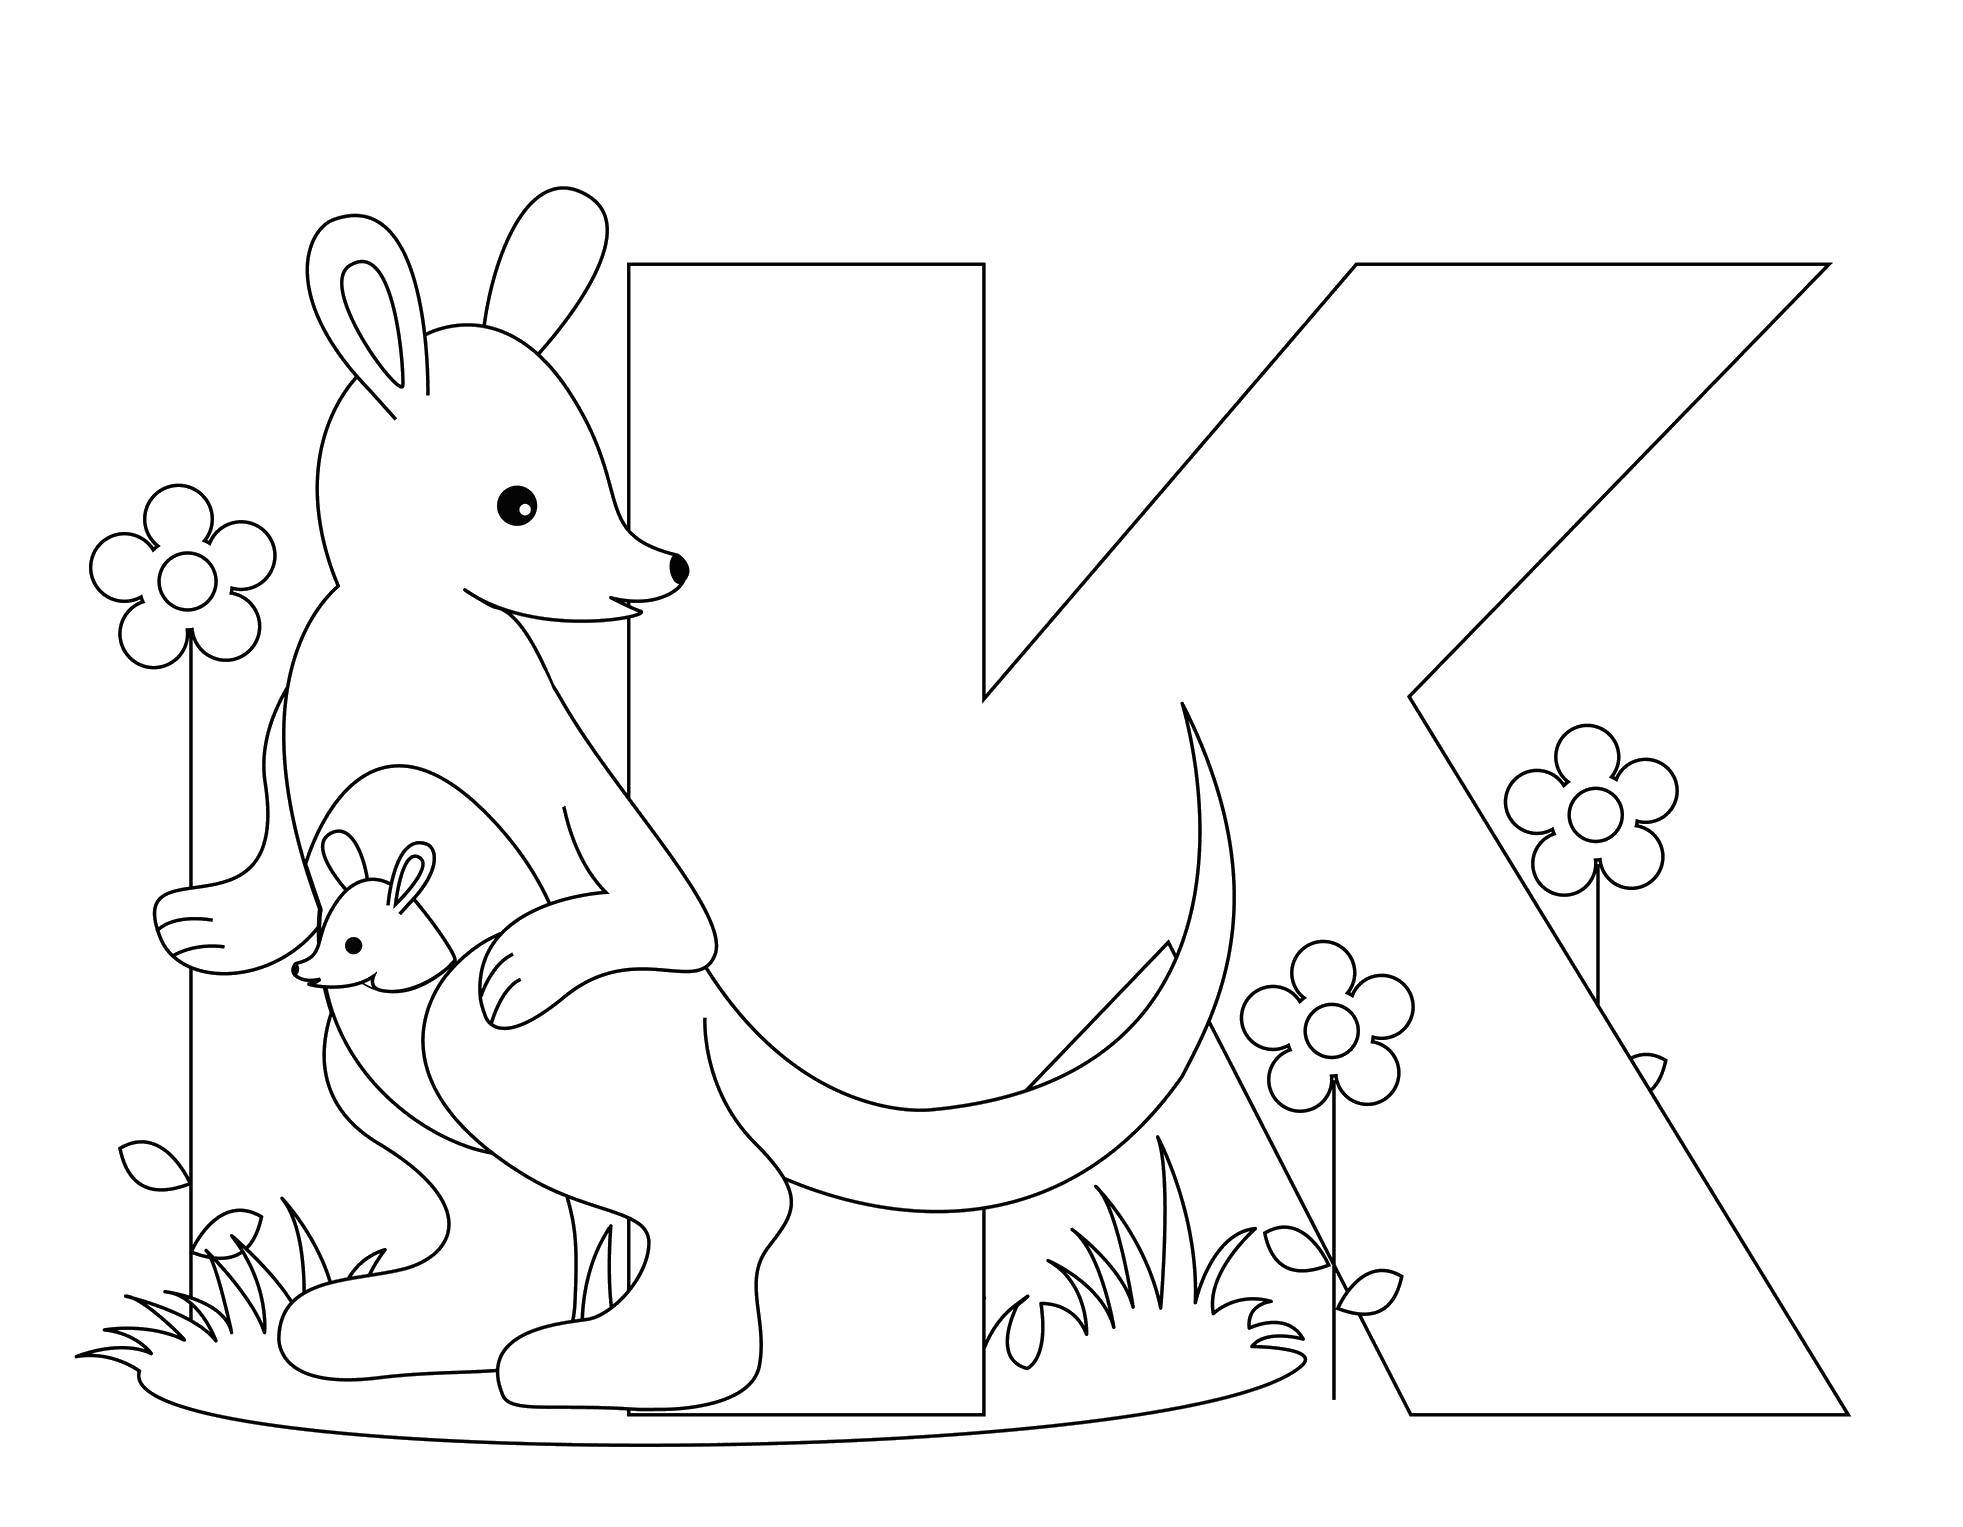 Coloring English alphabet with animals. Category English alphabet. Tags:  The alphabet, letters.